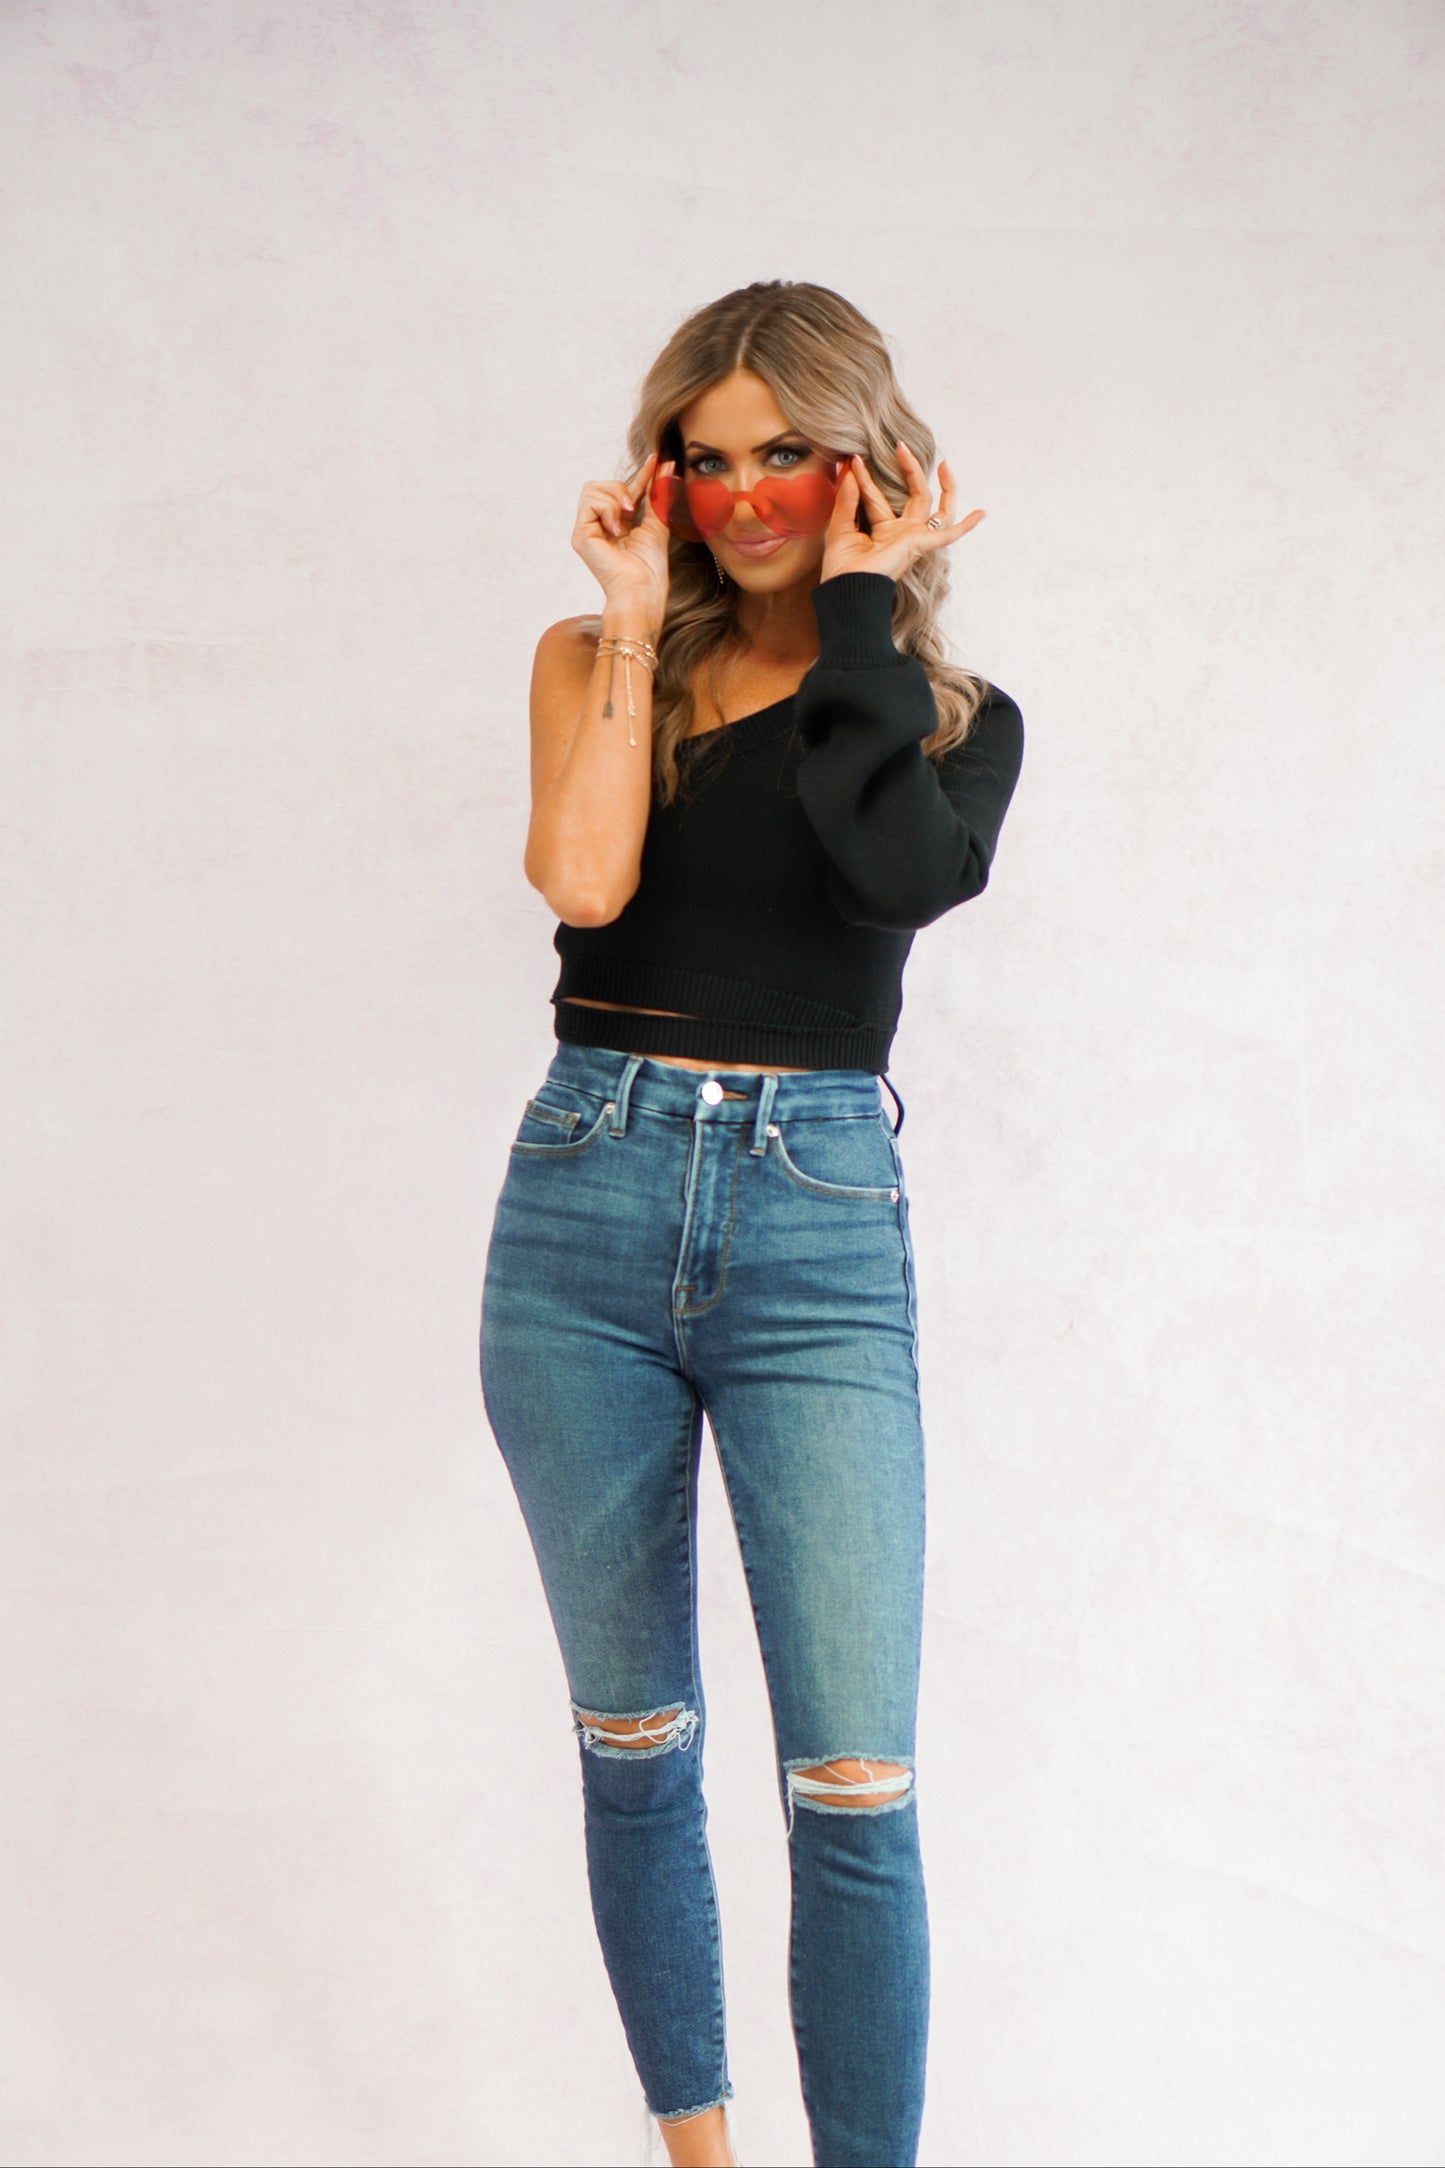 girl showing off her heart shaped glasses while wearing a black one shoulder sweater with cut out detail around the waist and jeans